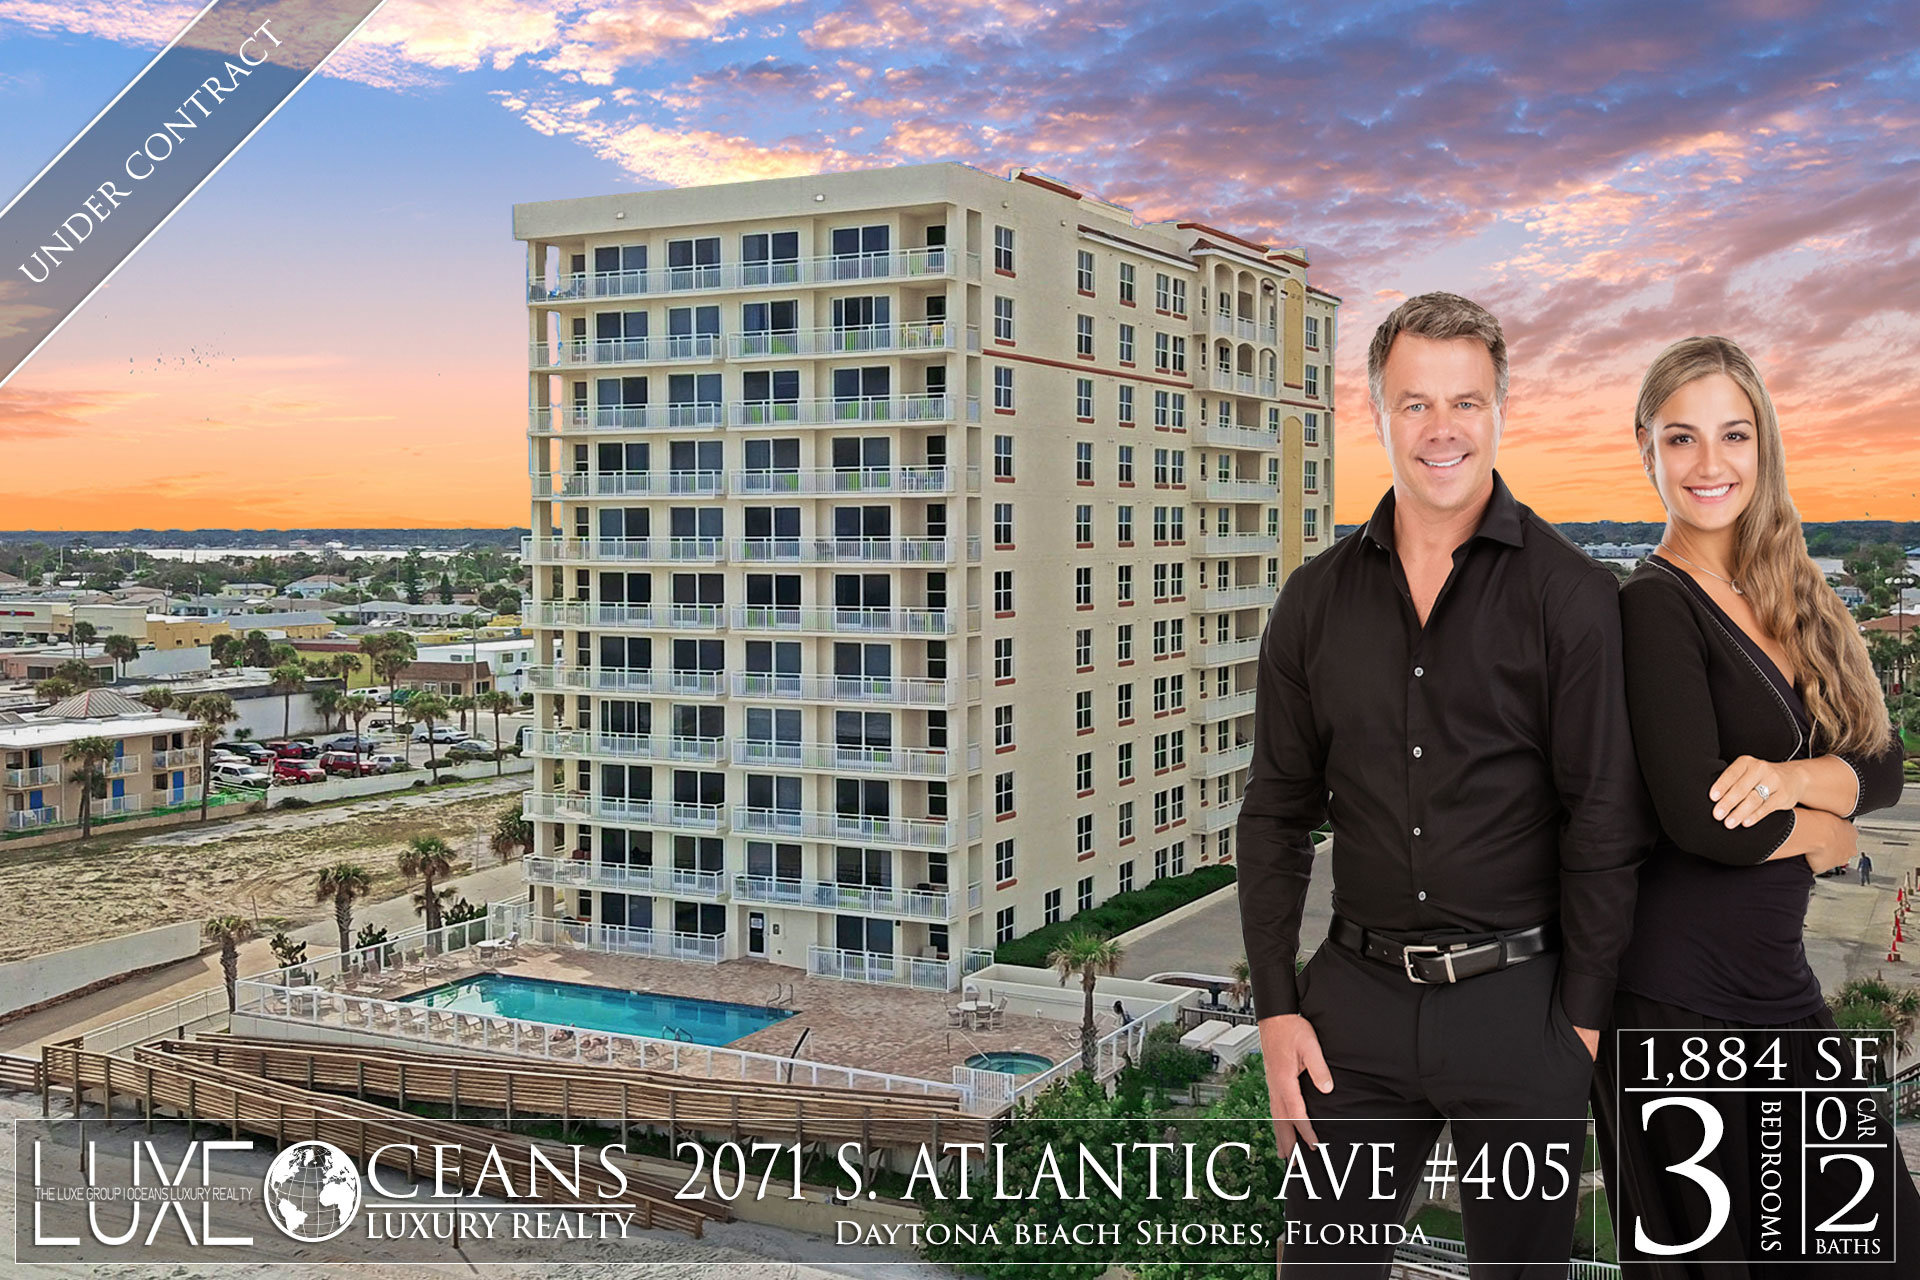 Opus Condos For Sale Oceanfront Real Estate at 2071 S Atlantic Ave Daytona Beach Shores, FL 405 Under Contract